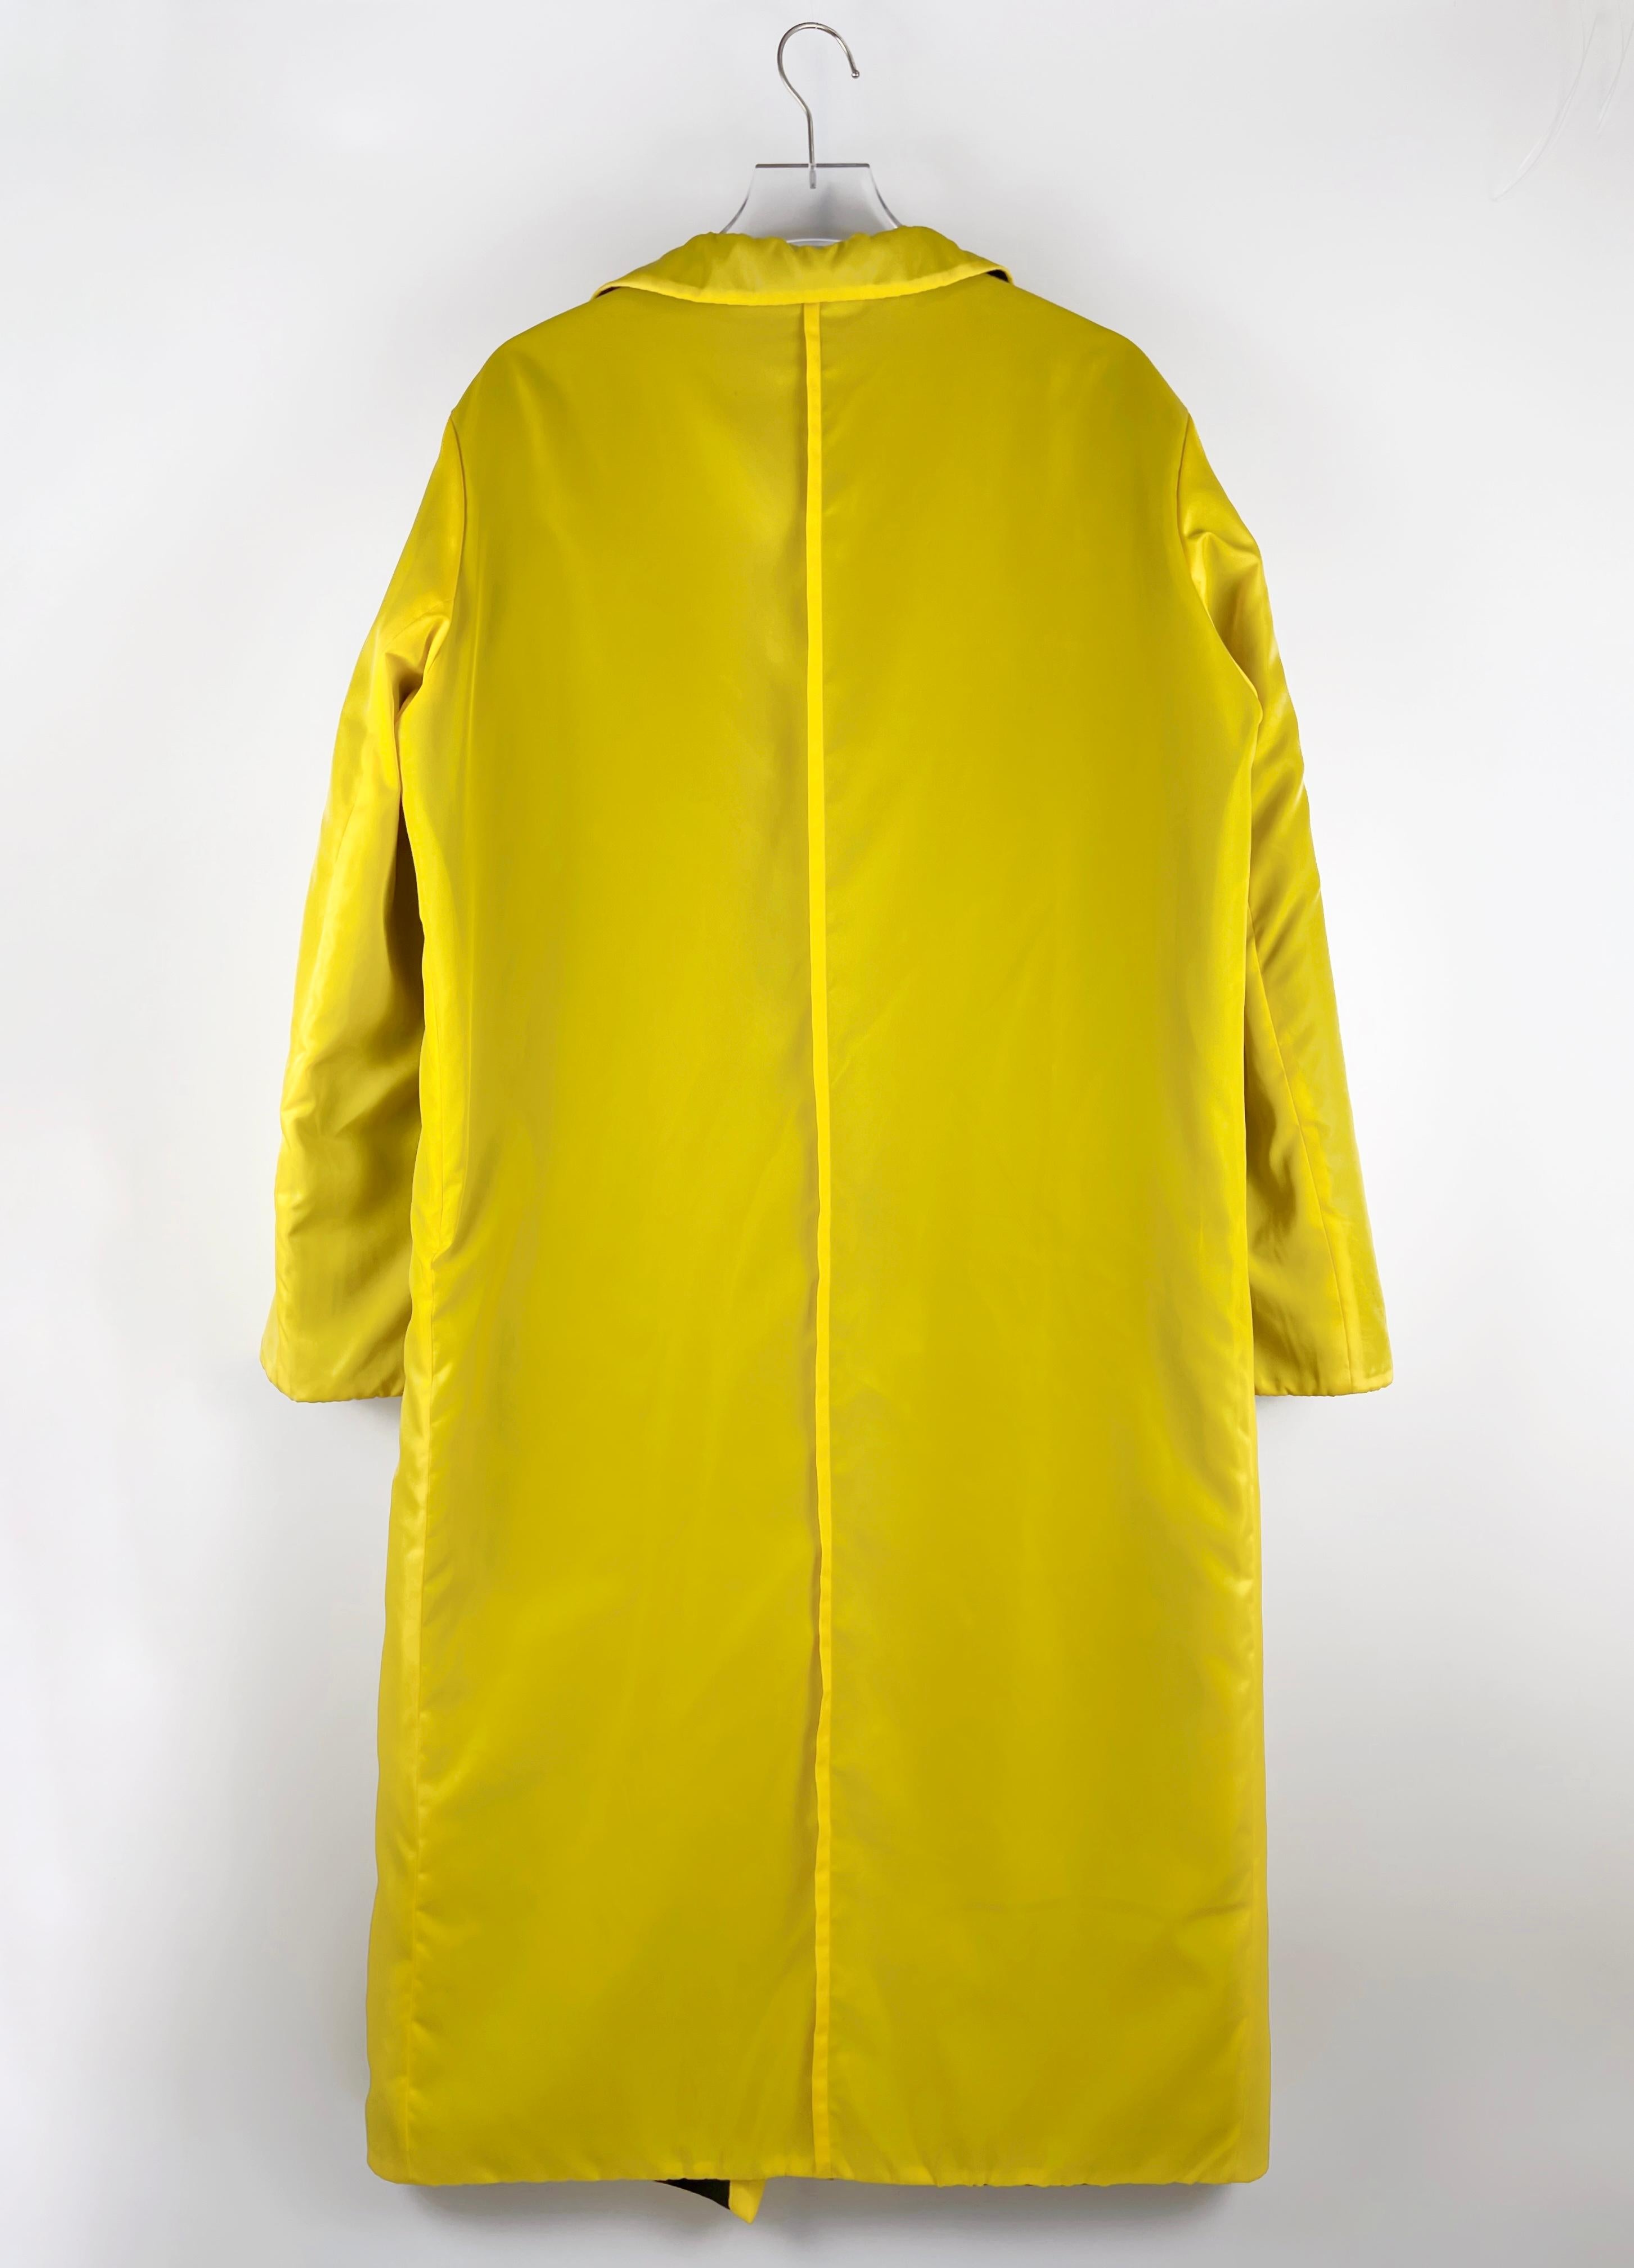 Y's Yellow Puffer Trench Coat In Excellent Condition For Sale In Seattle, WA